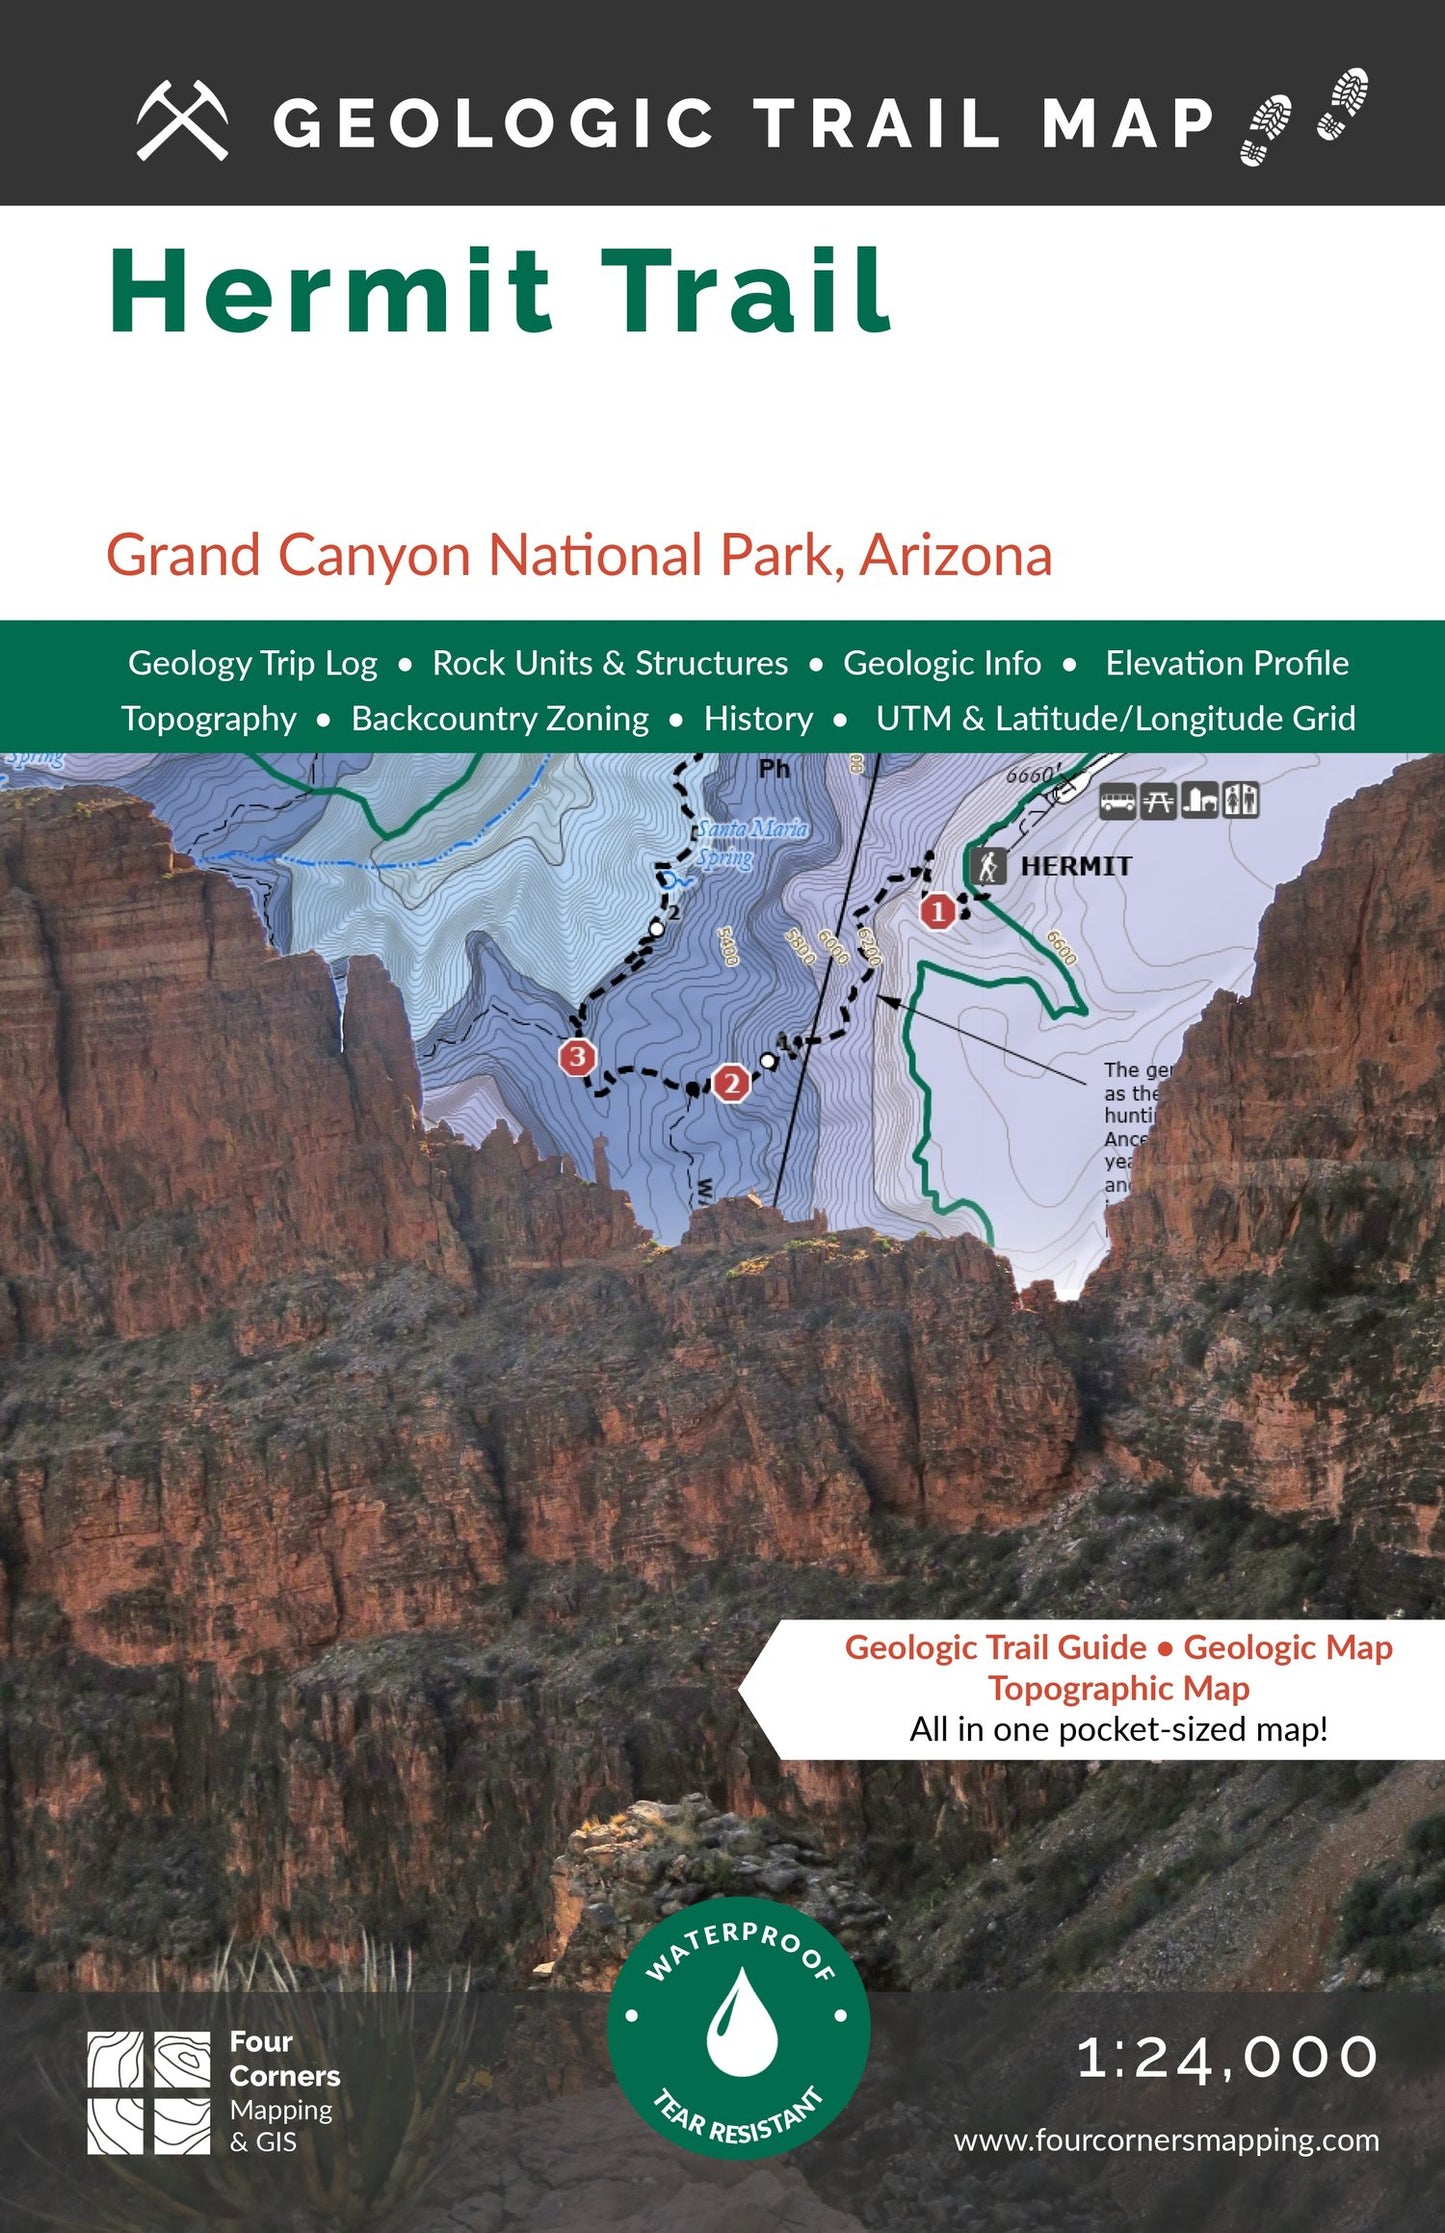 Four Corners Mapping Geologic Trail Maps of the Grand Canyon - hermit trail grand canyon national park arizona.